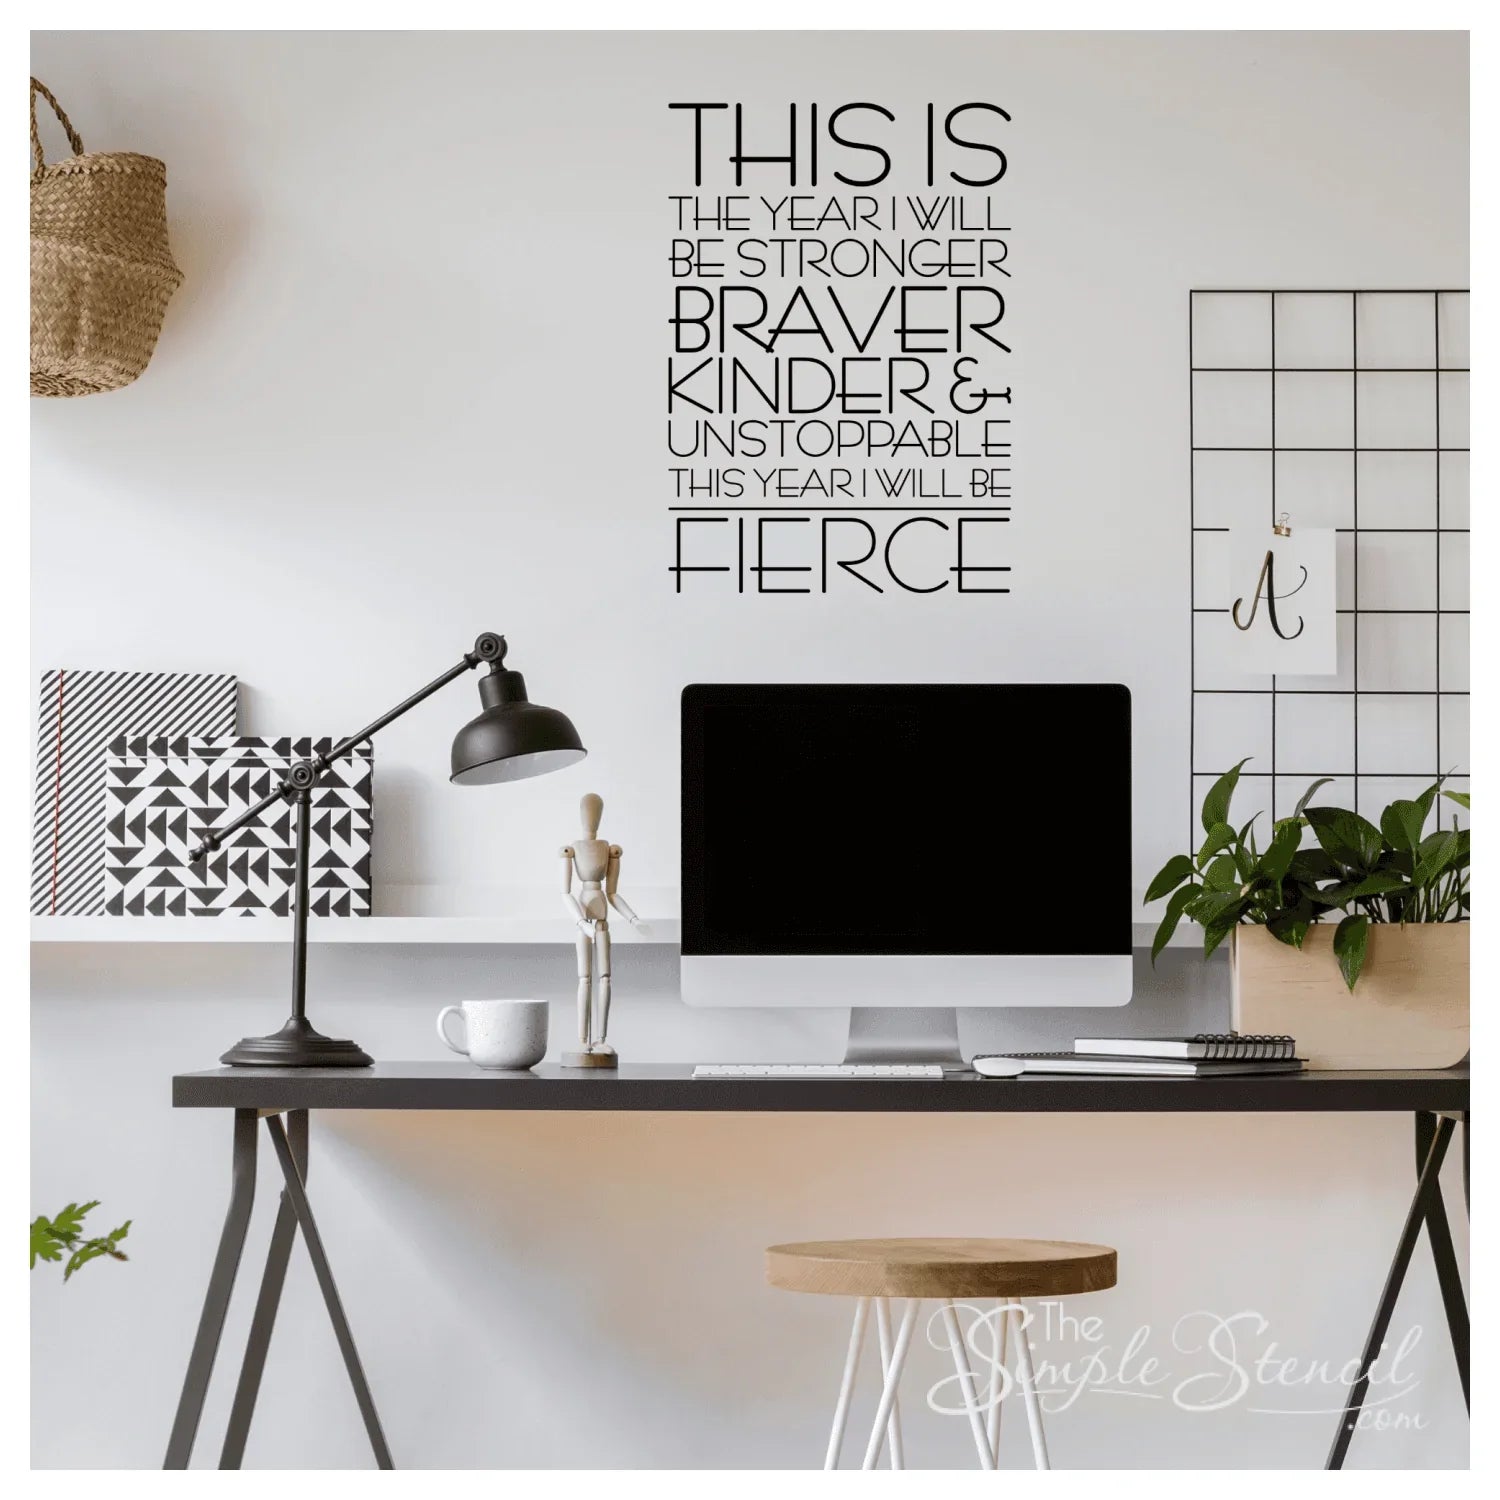 25 Inspirational New Year's Quotes To Motivate While Adding Inspiring & Beautiful Decor To Your Living & Working Spaces. Wall Quote Decal by TheSimpleStencil.com